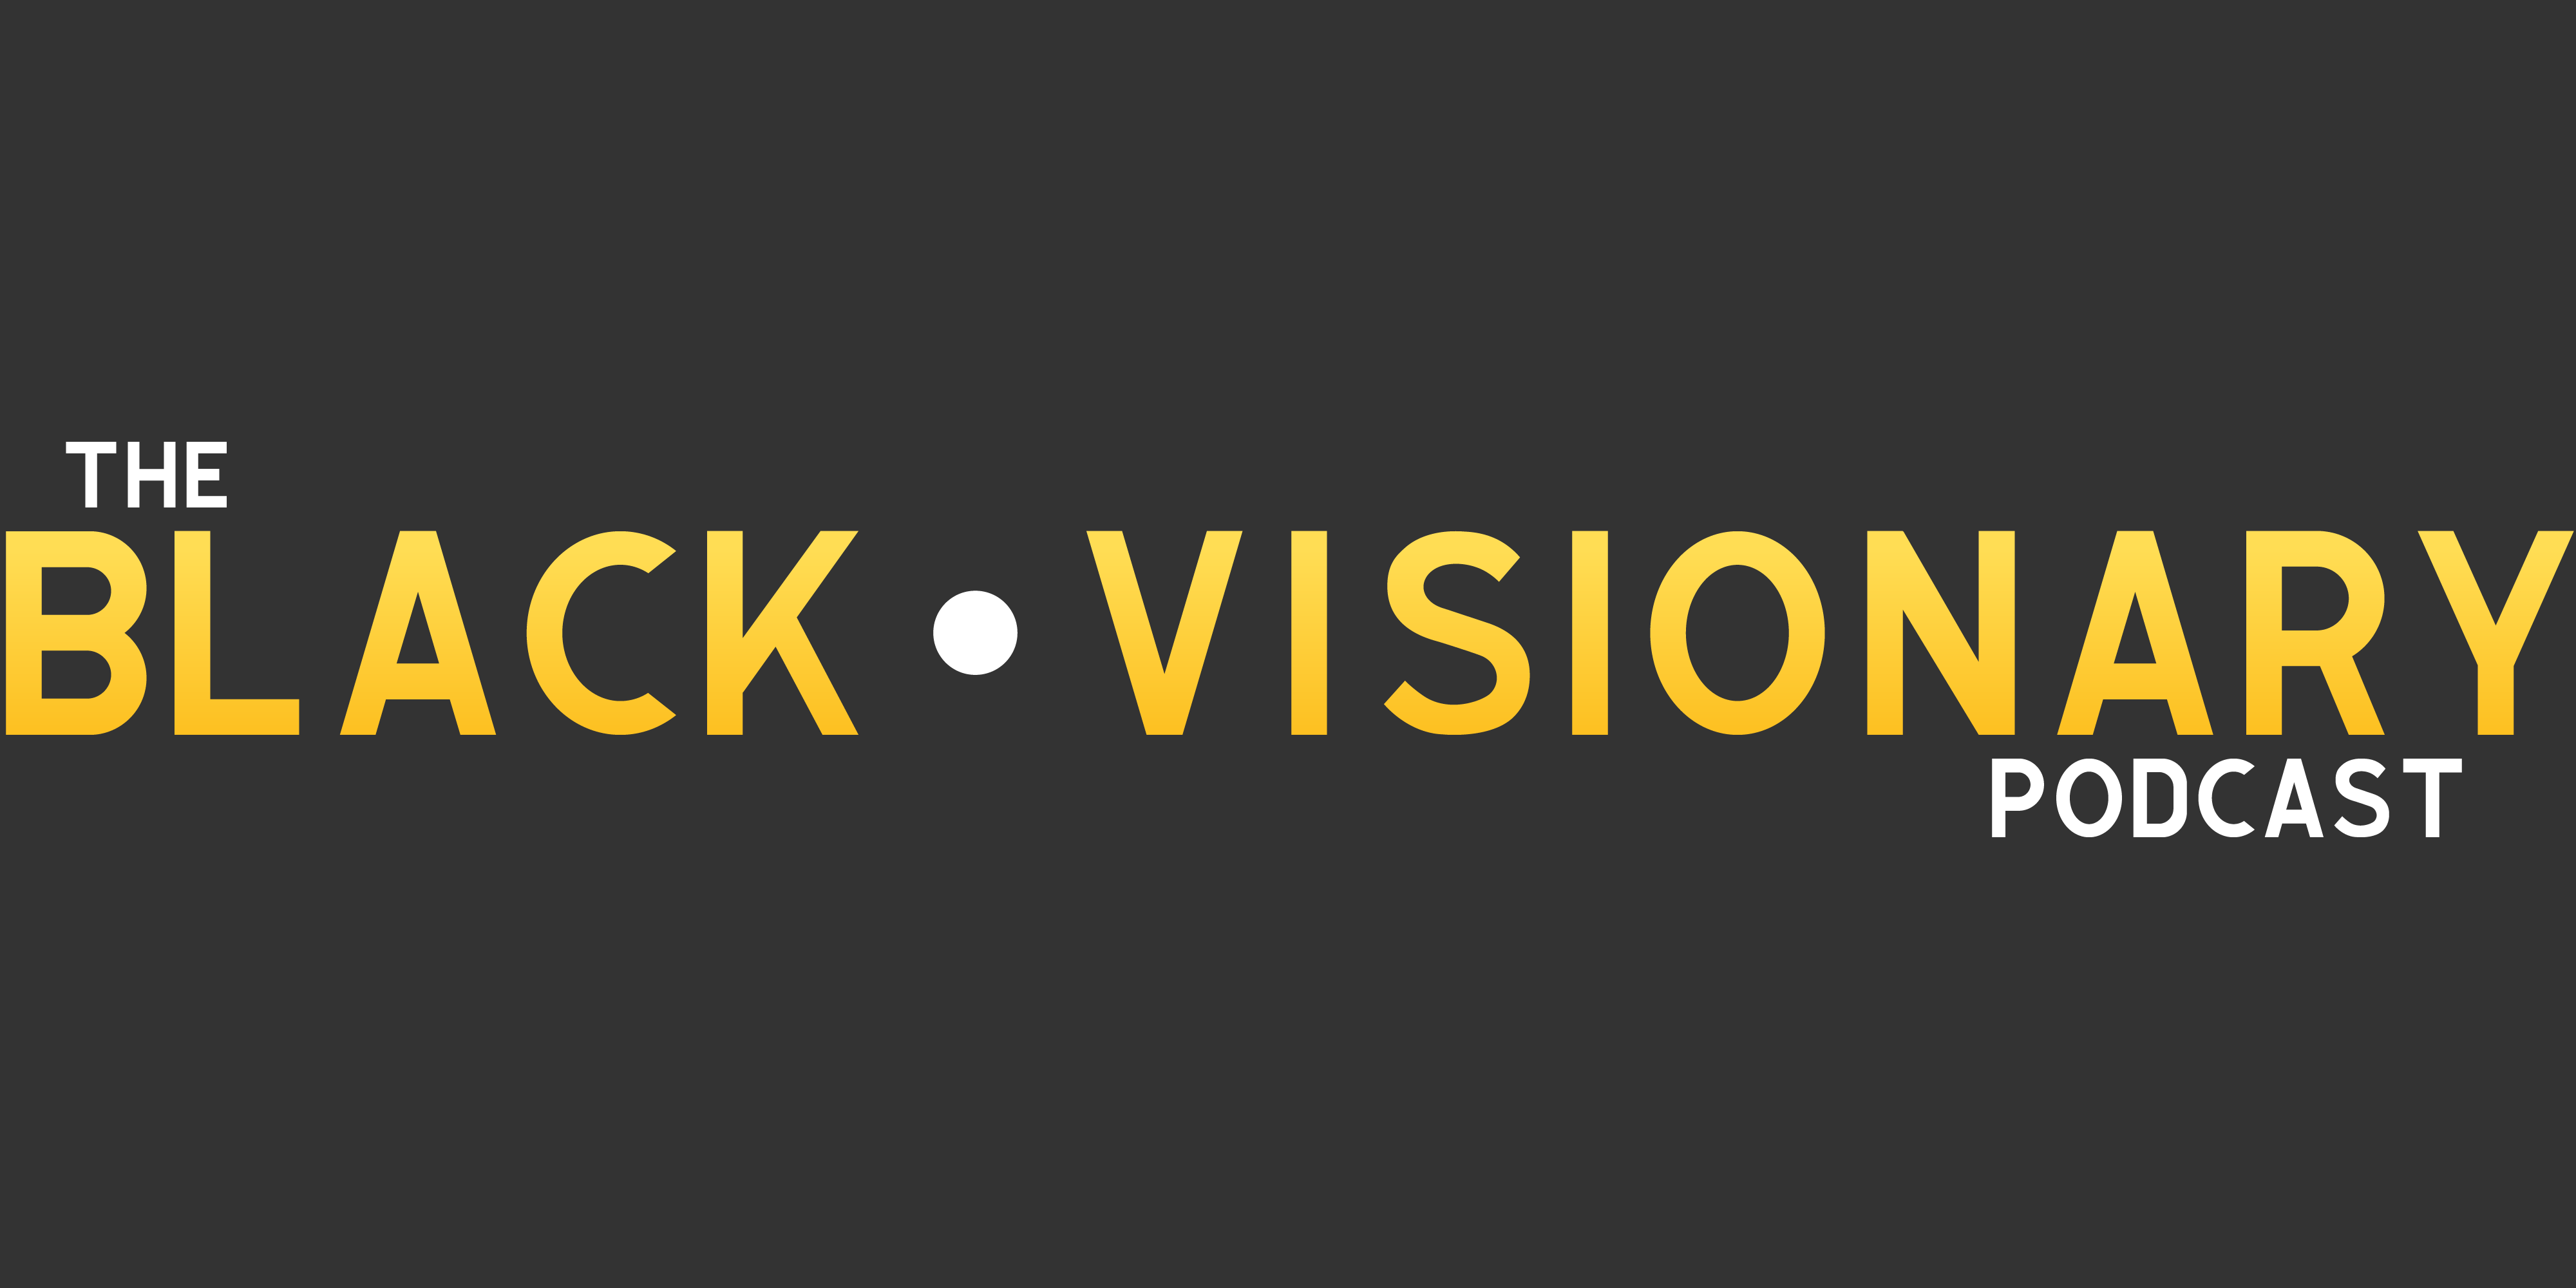 The Black • Visionary Podcast